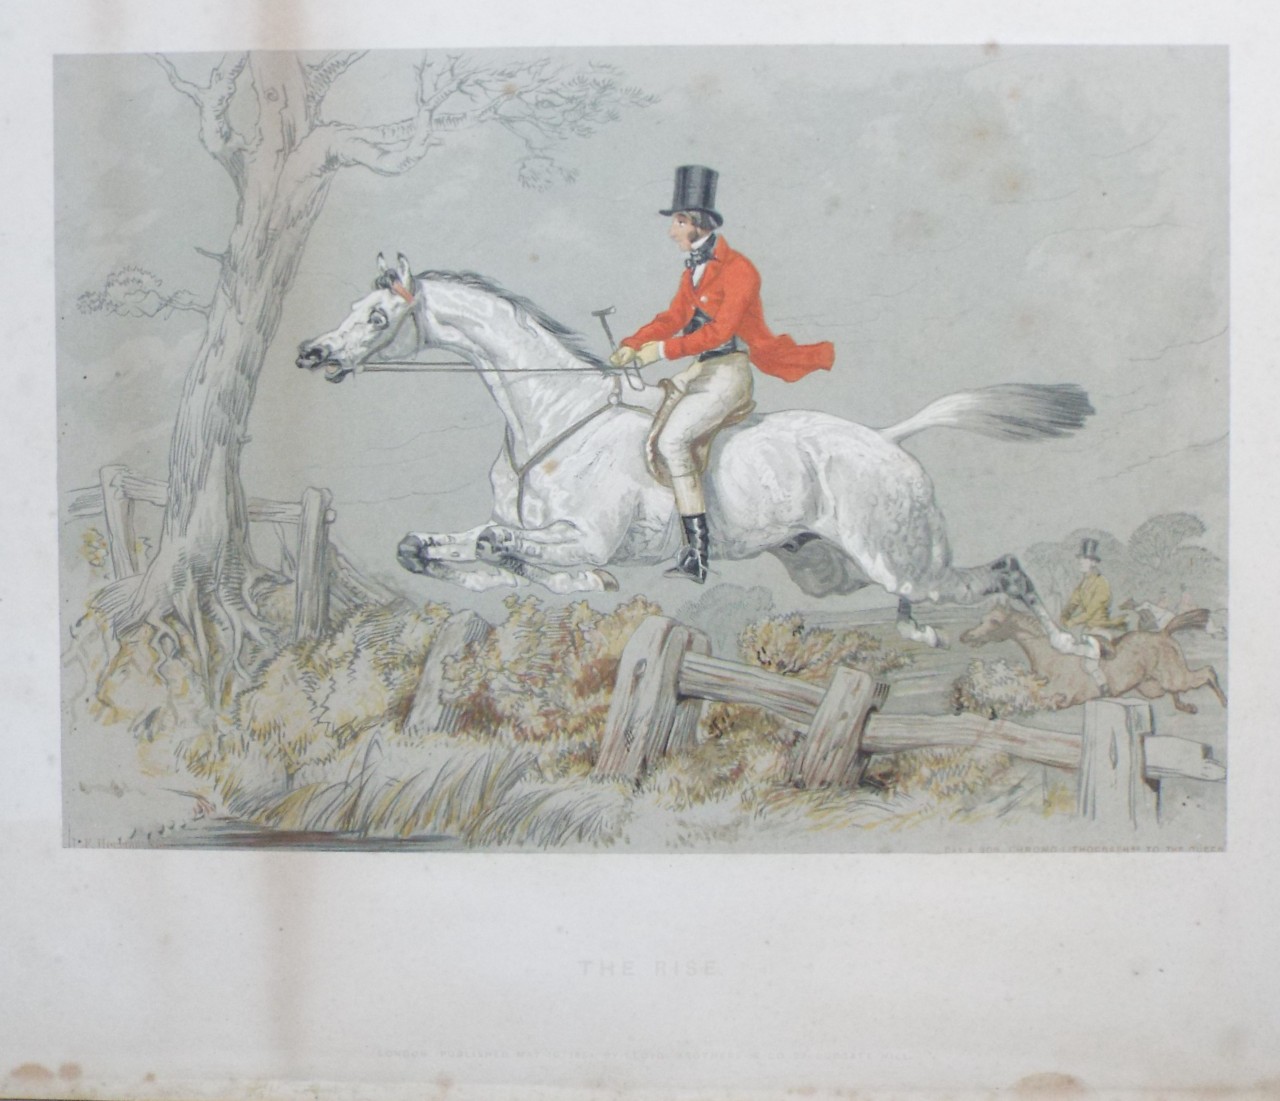 Chromo-lithograph - Herring's Sporting Sketches. The Rise.